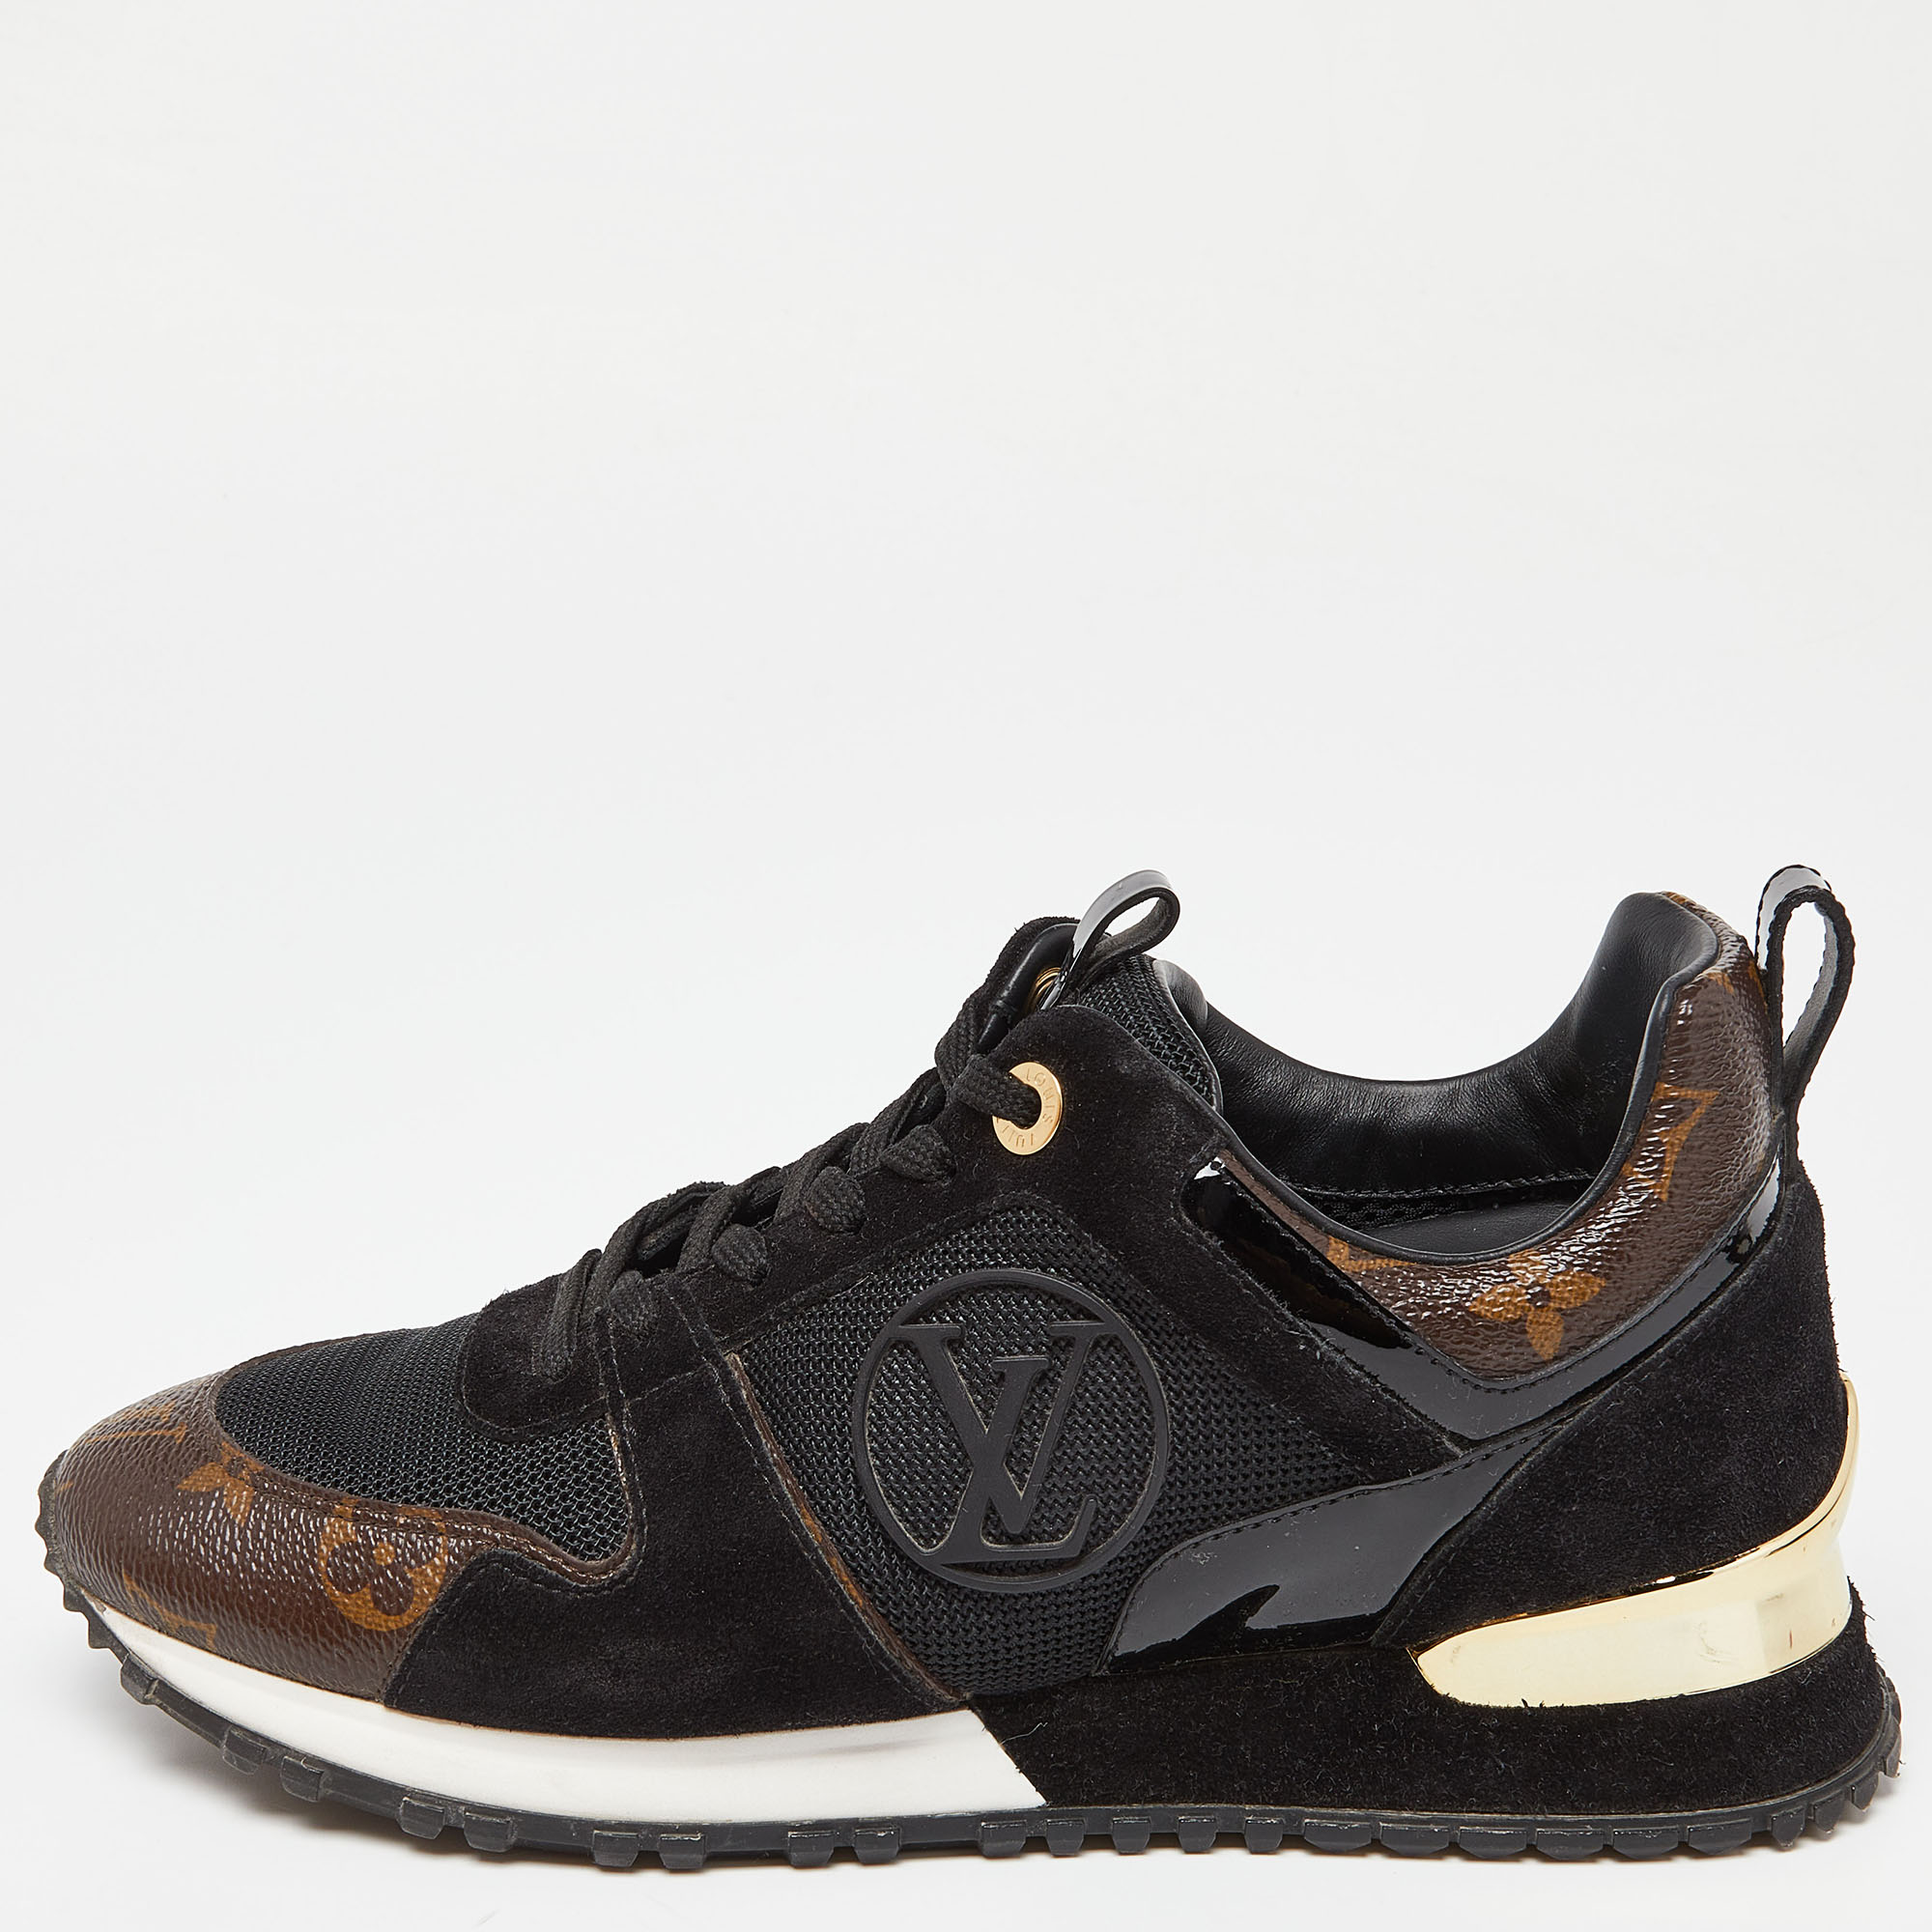 Louis Vuitton Black/Brown Monogram Canvas,Leather And Mesh Run Away Sneakers Size 36.5